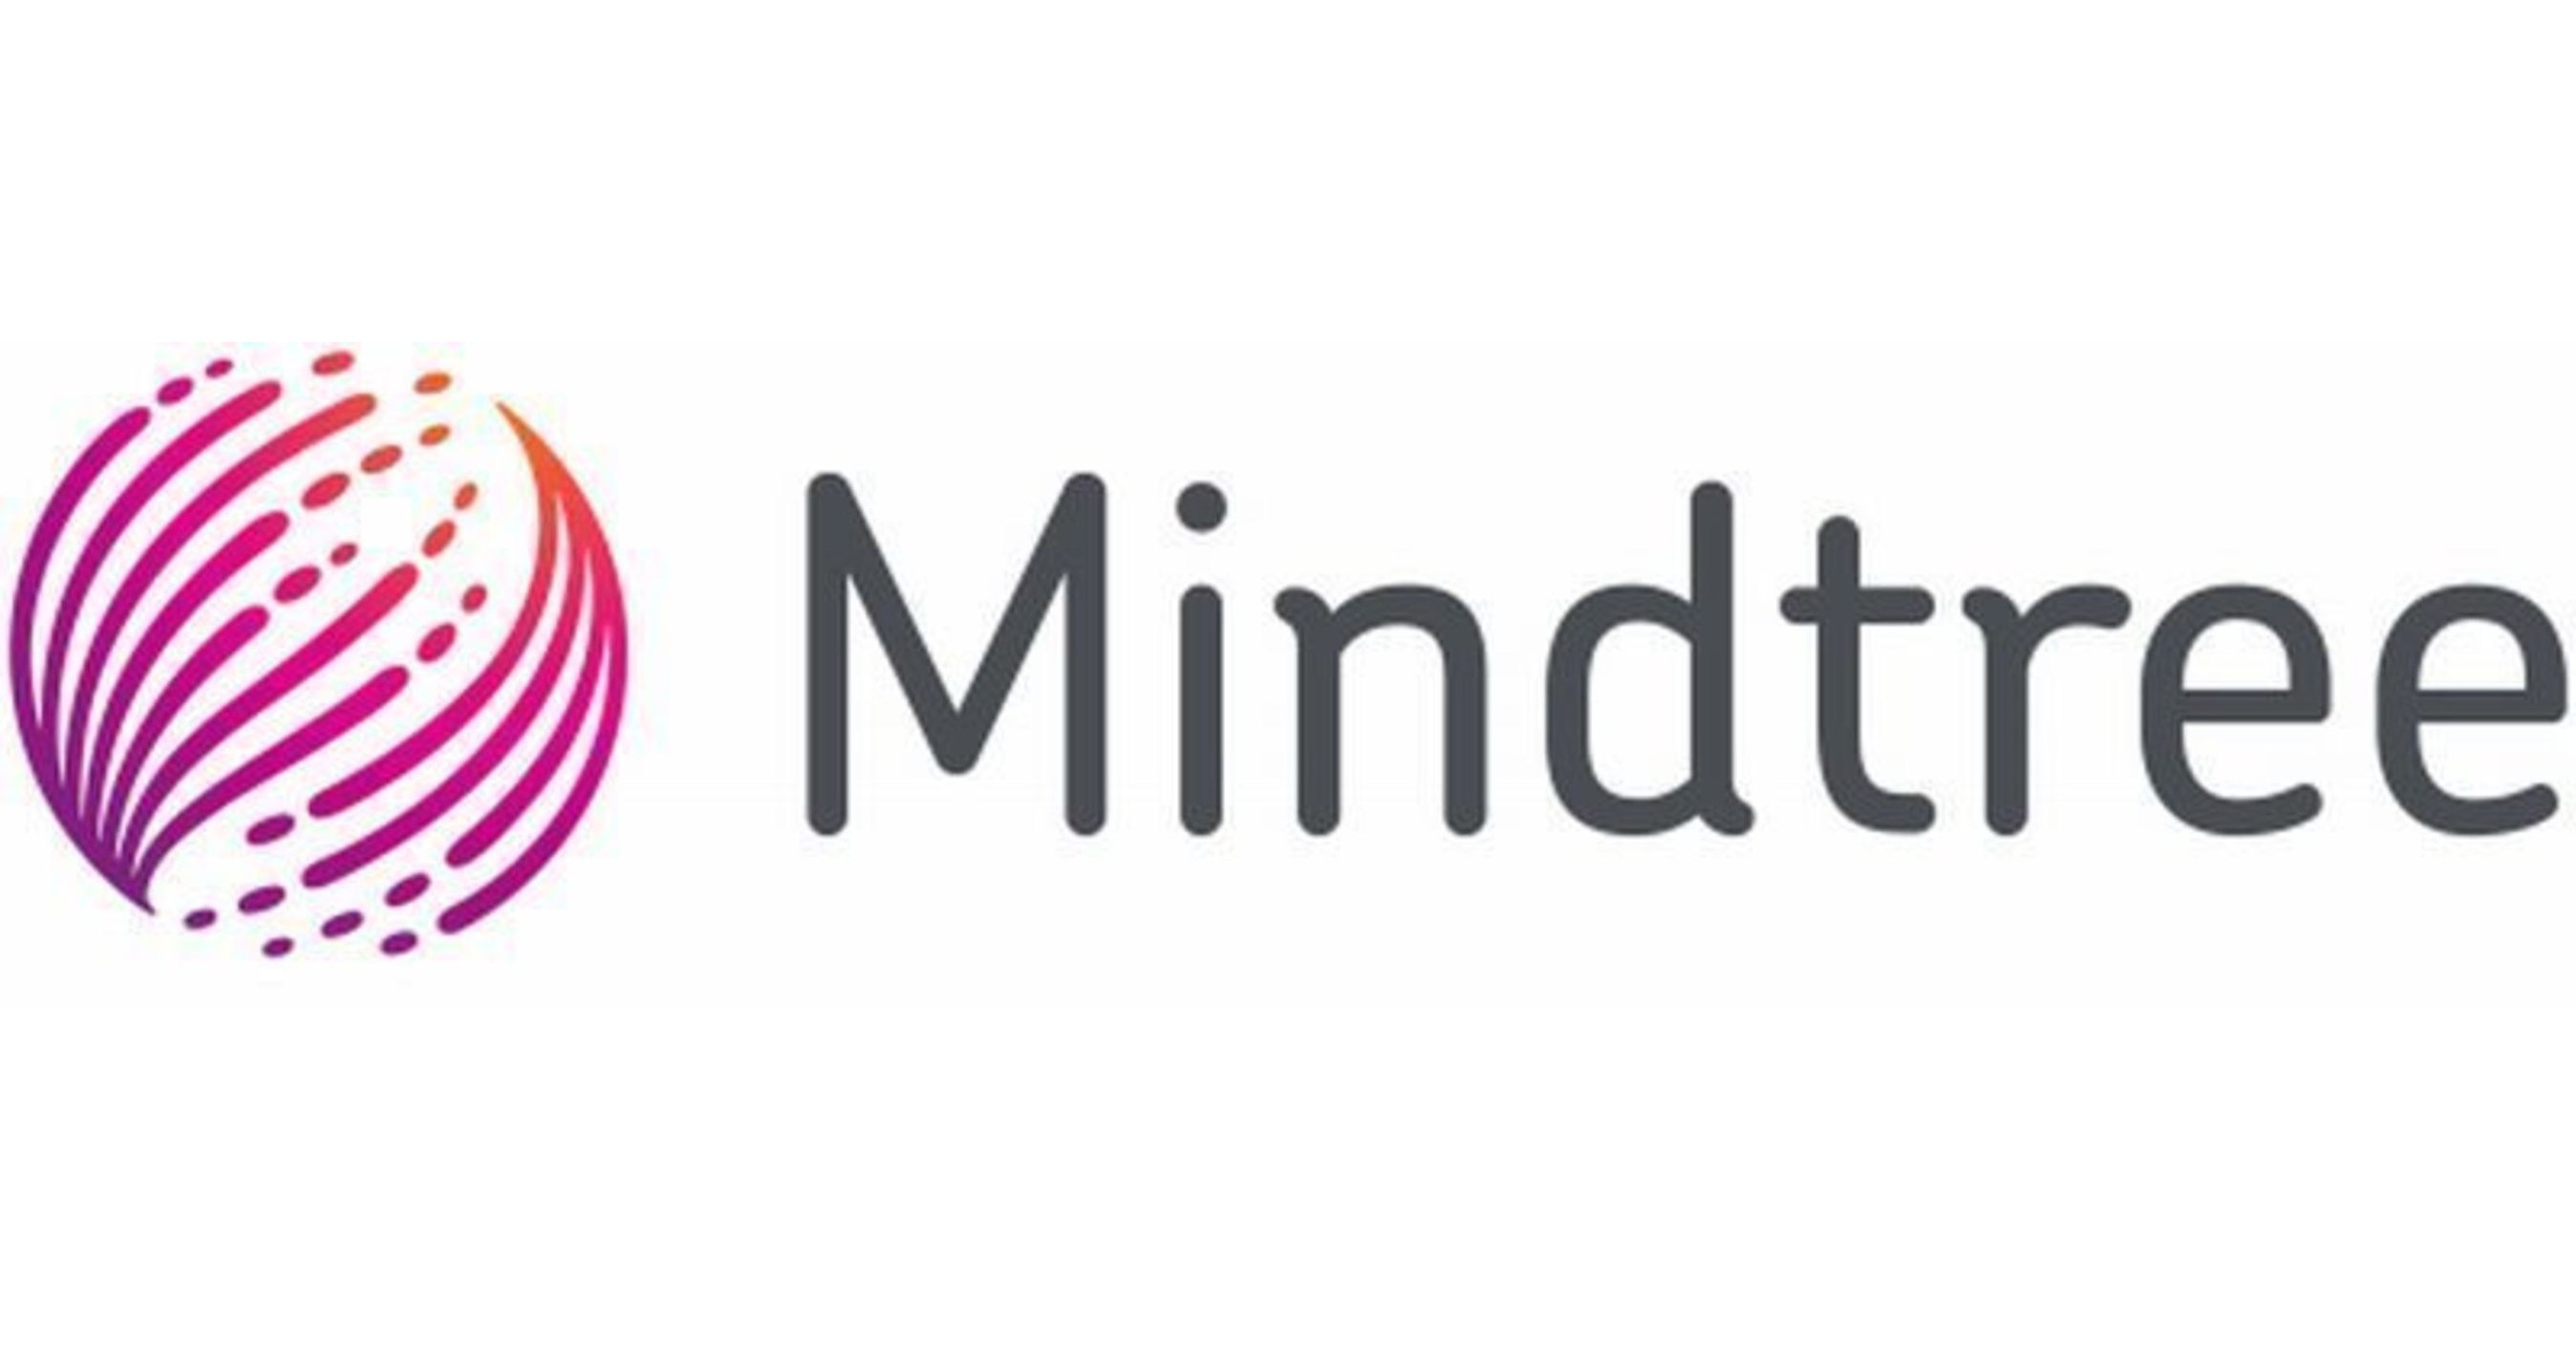 mindtree.org launches social inclusion platform to democratize technology for micro-entrepreneurs